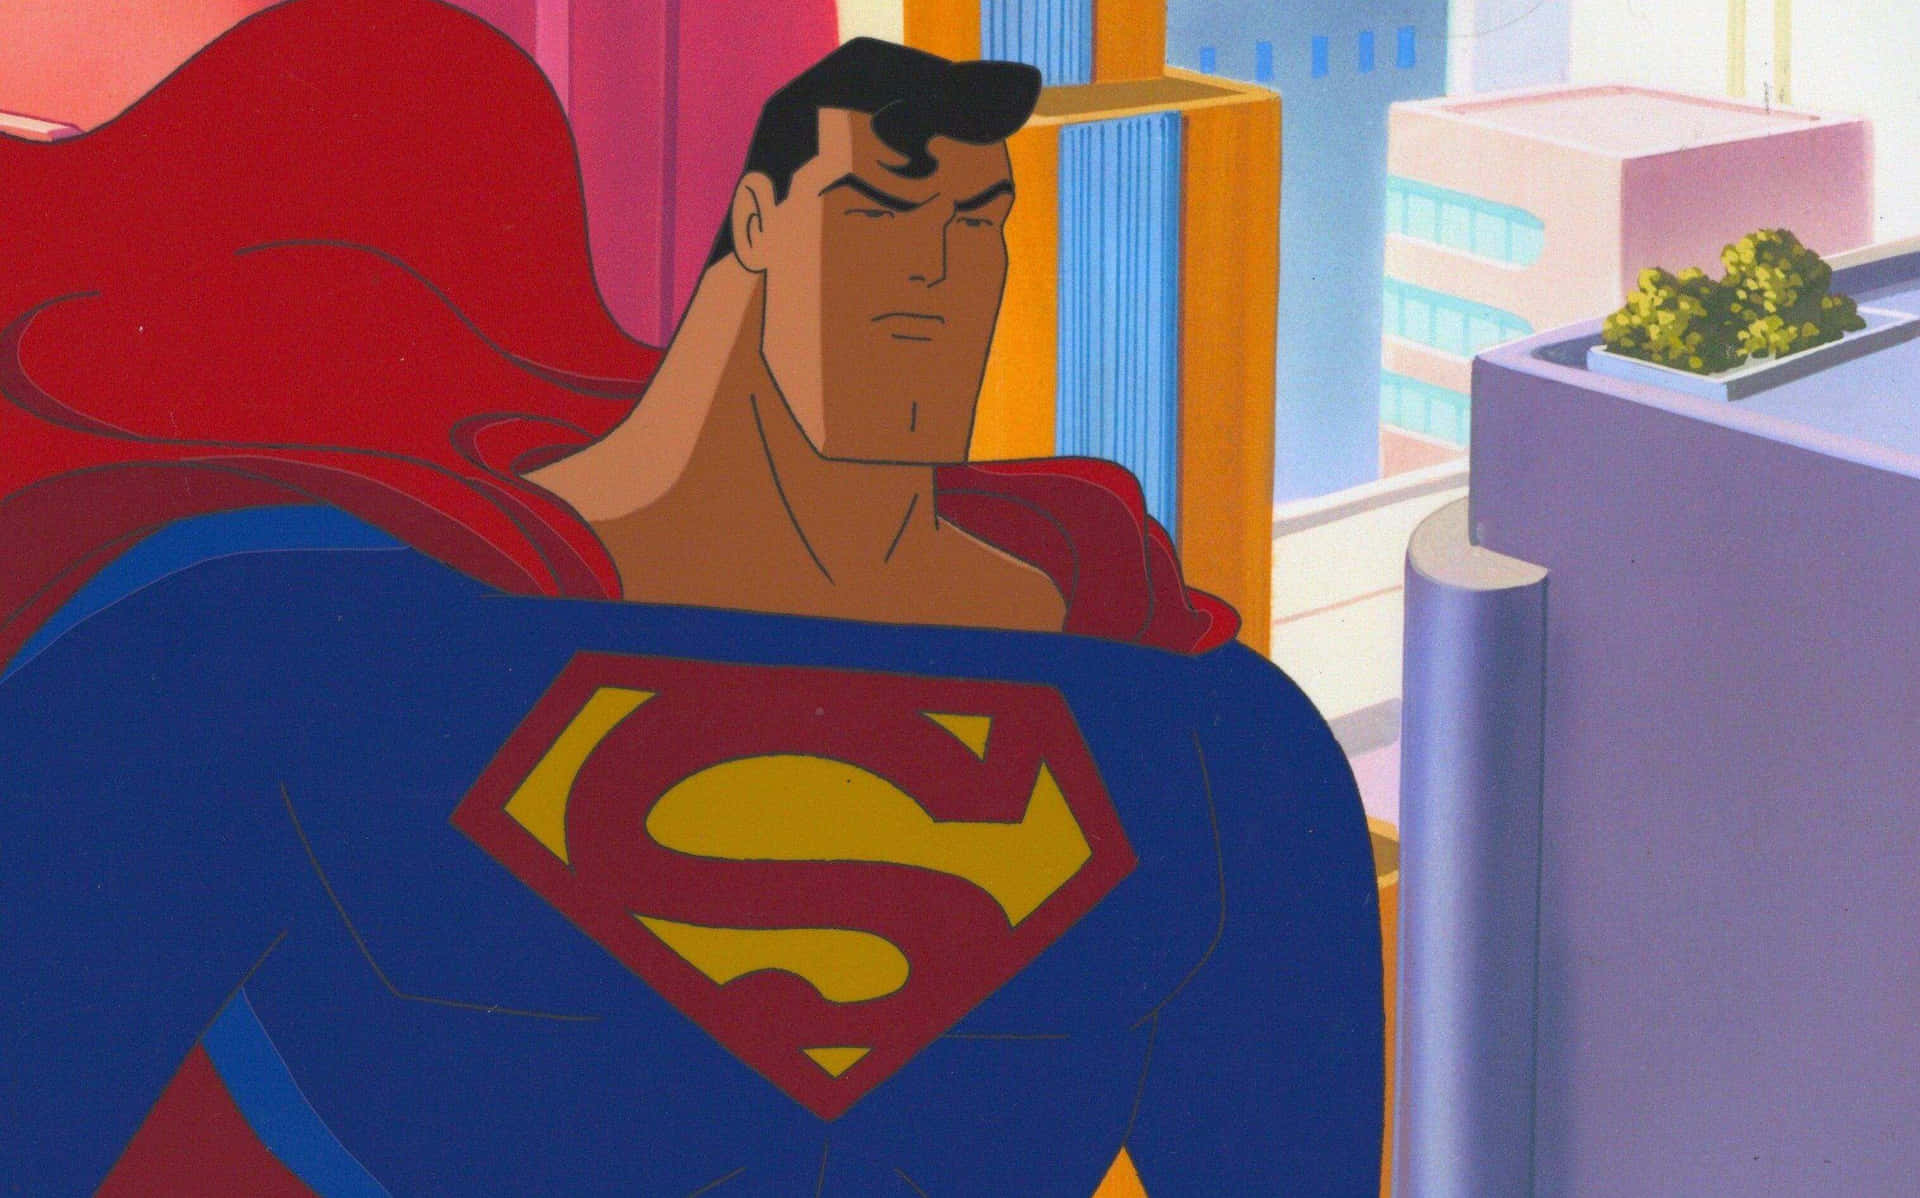 Superman flying high in Metropolis from Superman: The Animated Series Wallpaper